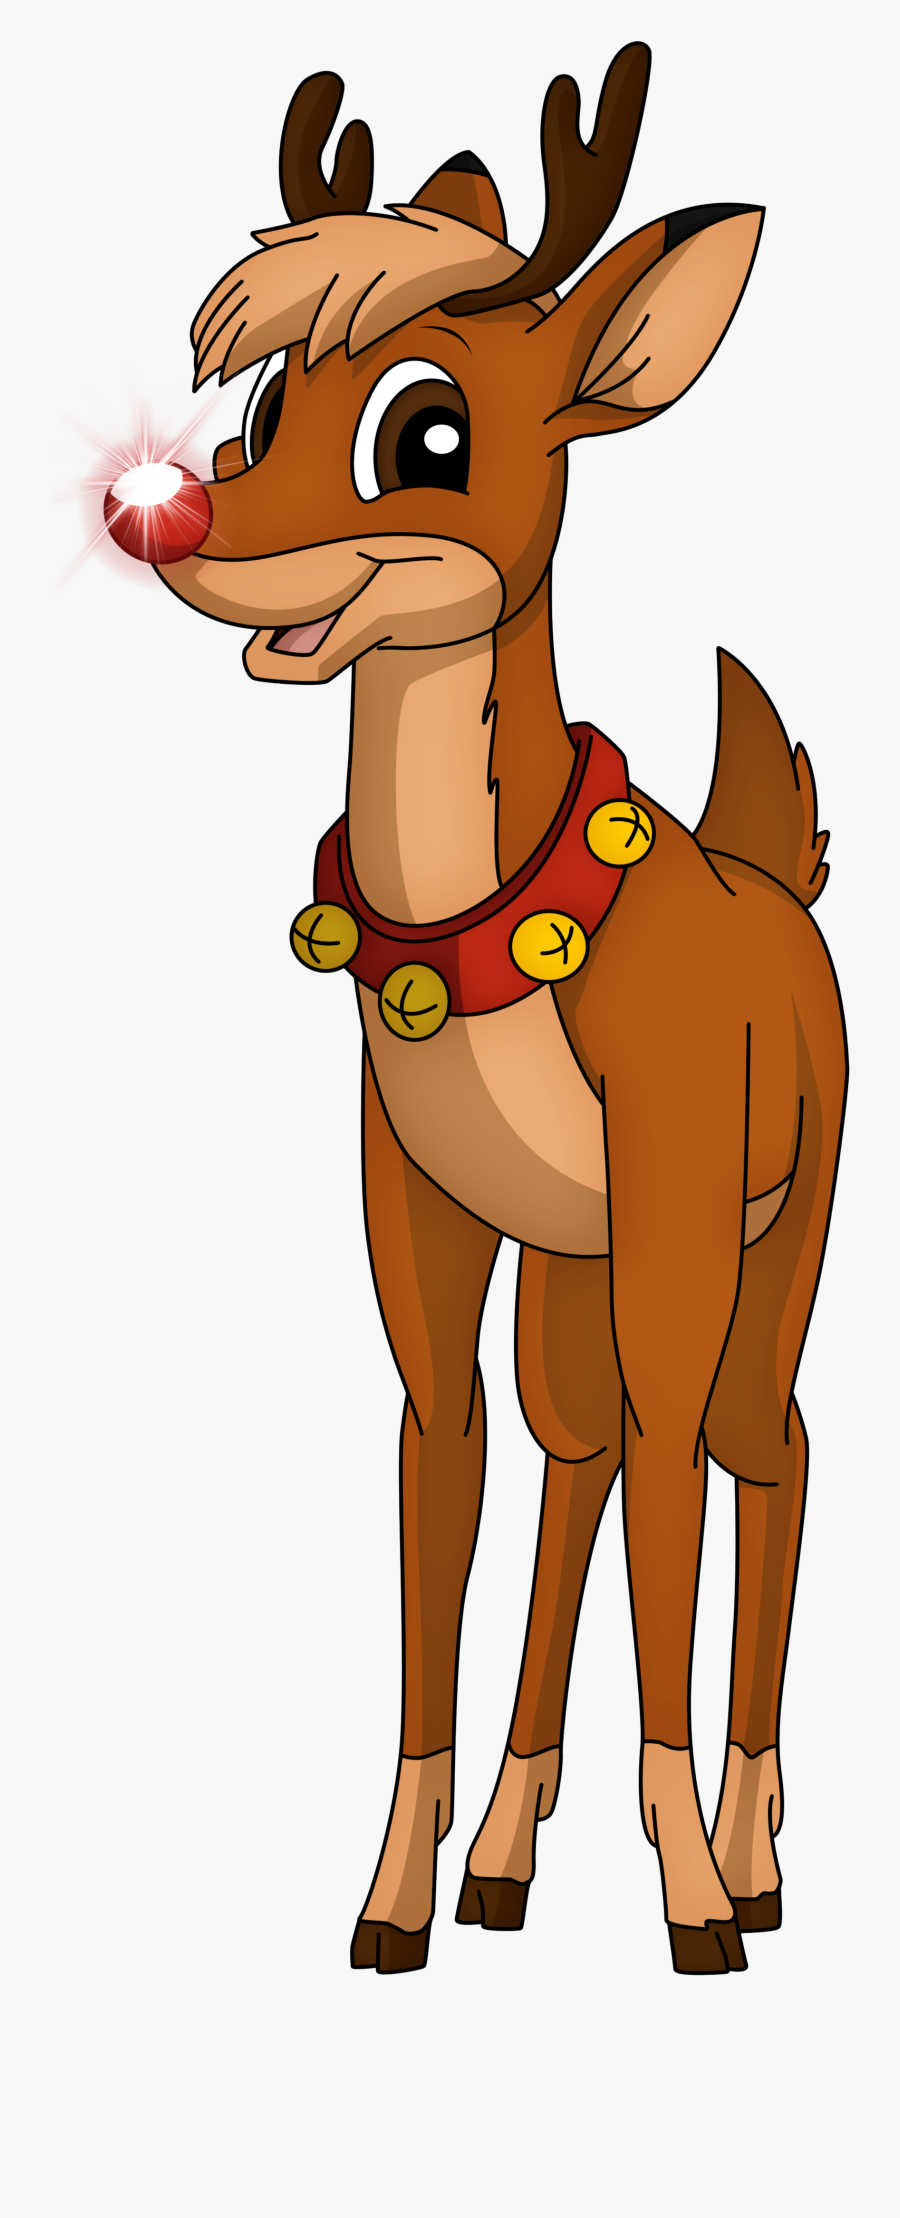 Rudolph Clipart - Rudolph The Red Nosed Reindeer The Movie Rudolph Deviantart, Transparent Clipart